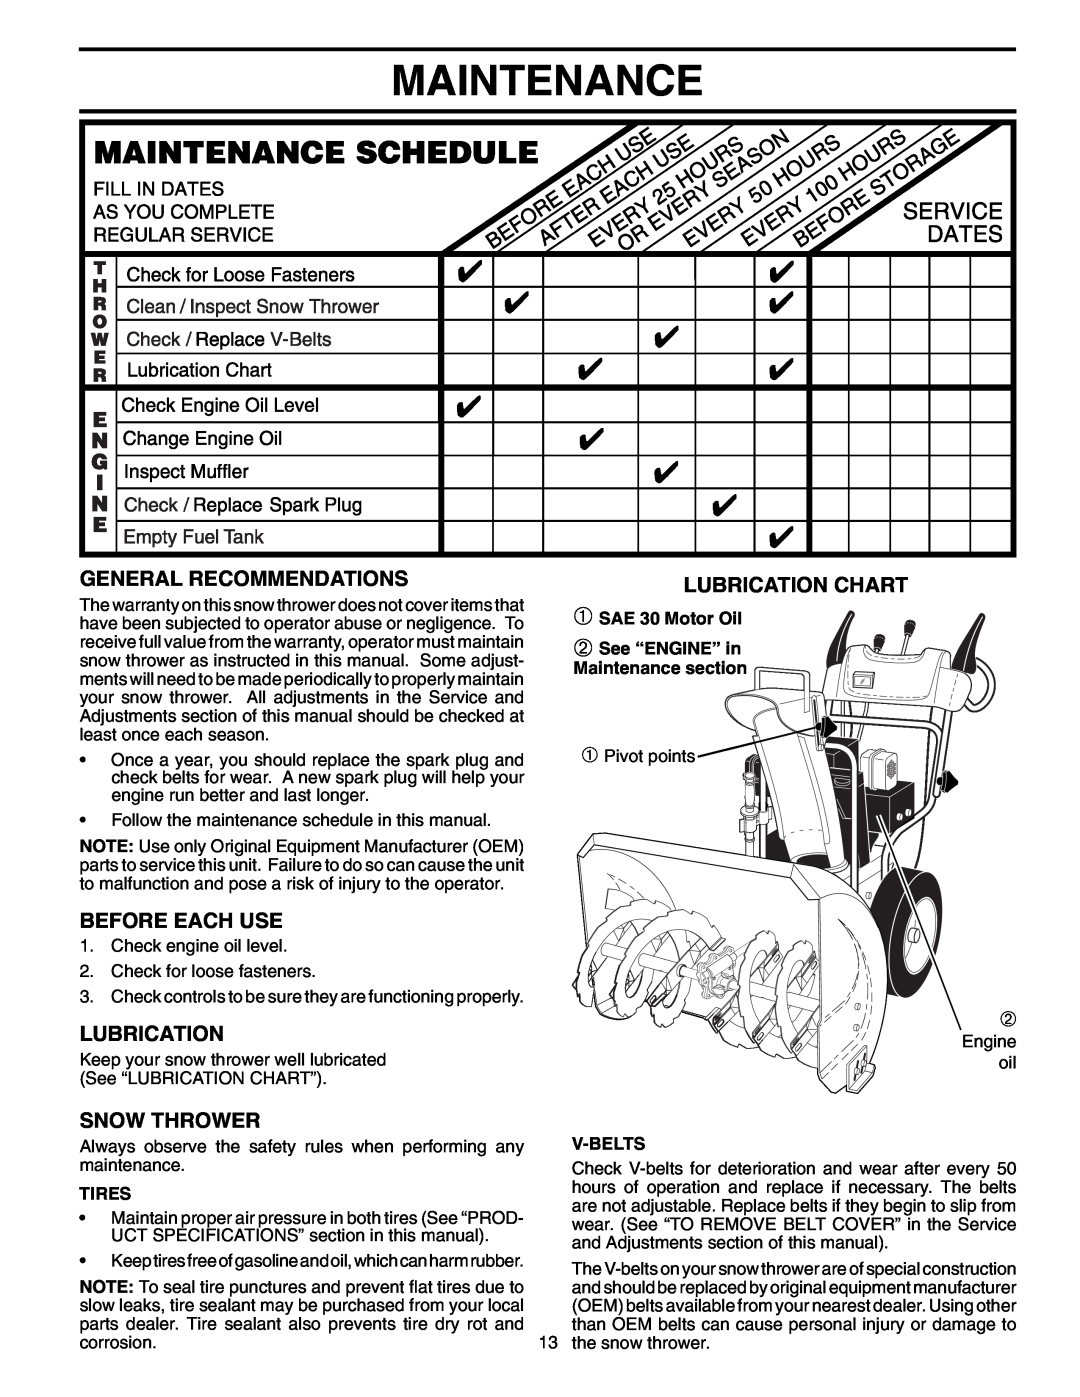 Poulan 199434 Maintenance, General Recommendations, Before Each Use, Lubrication Chart, Snow Thrower, Tires, V-Belts 